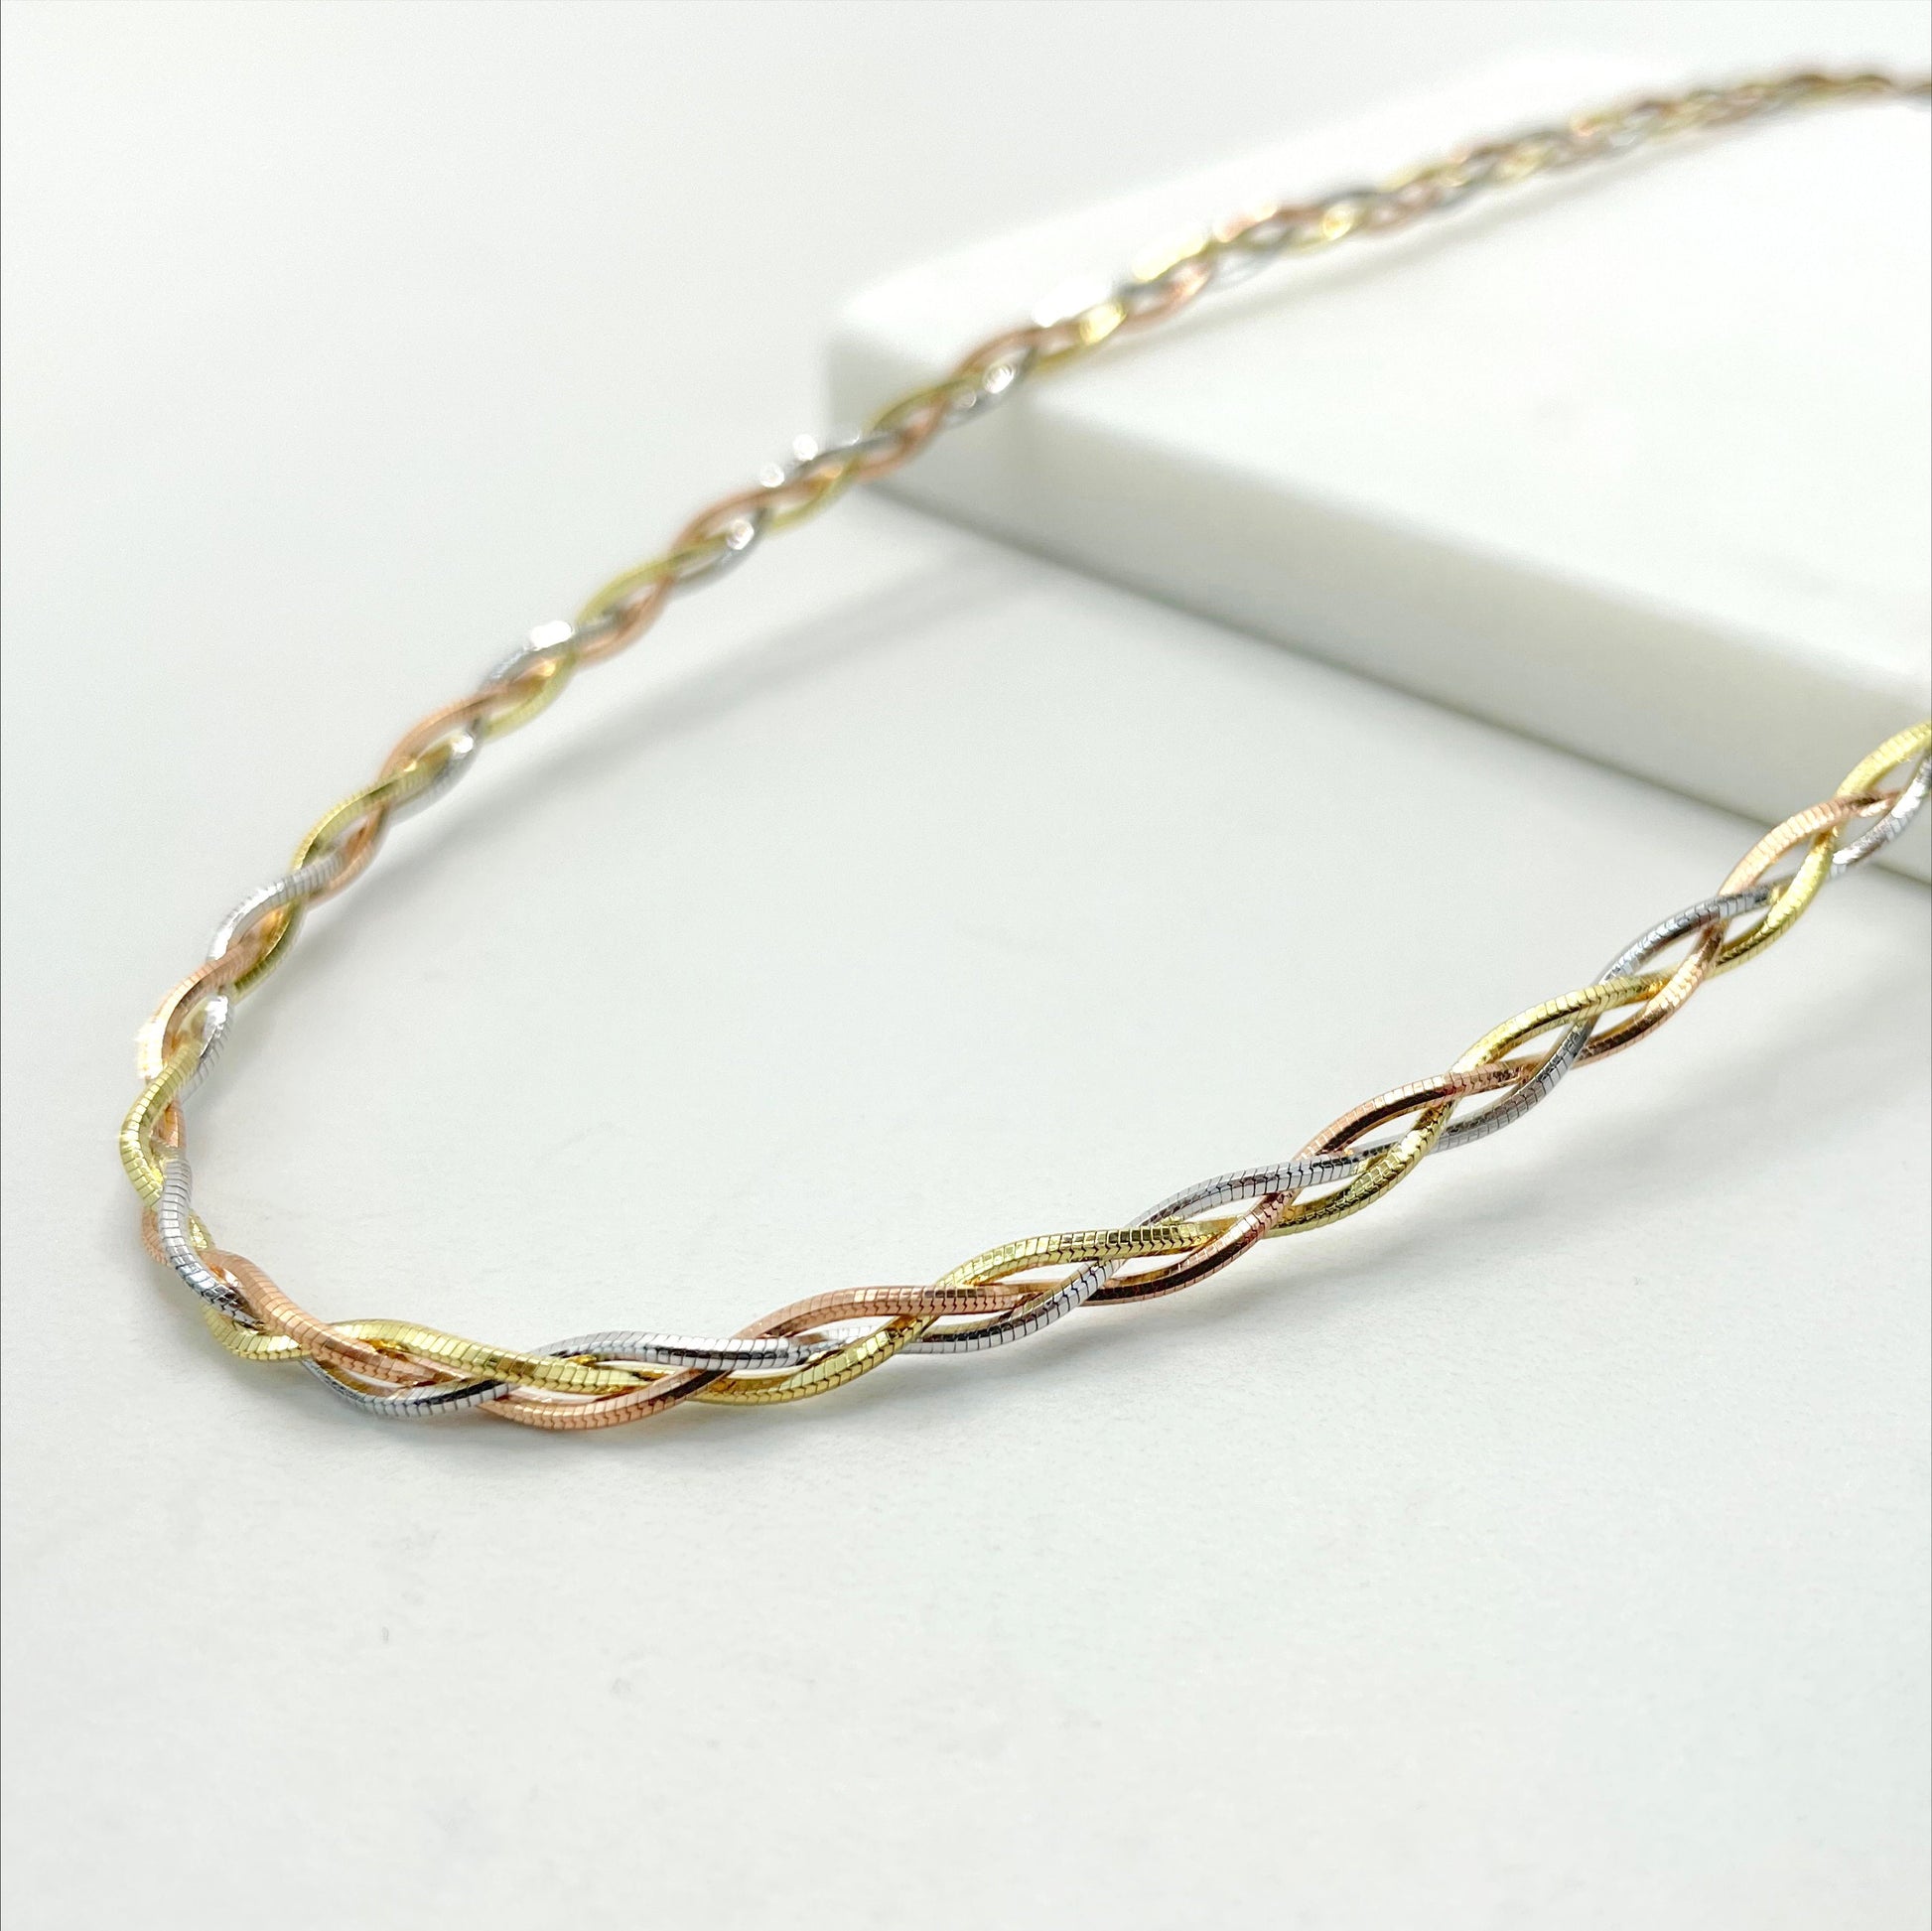 18k Gold Filled Three Tones Twisted Chain, Choker Wholesale Jewelry Supplies